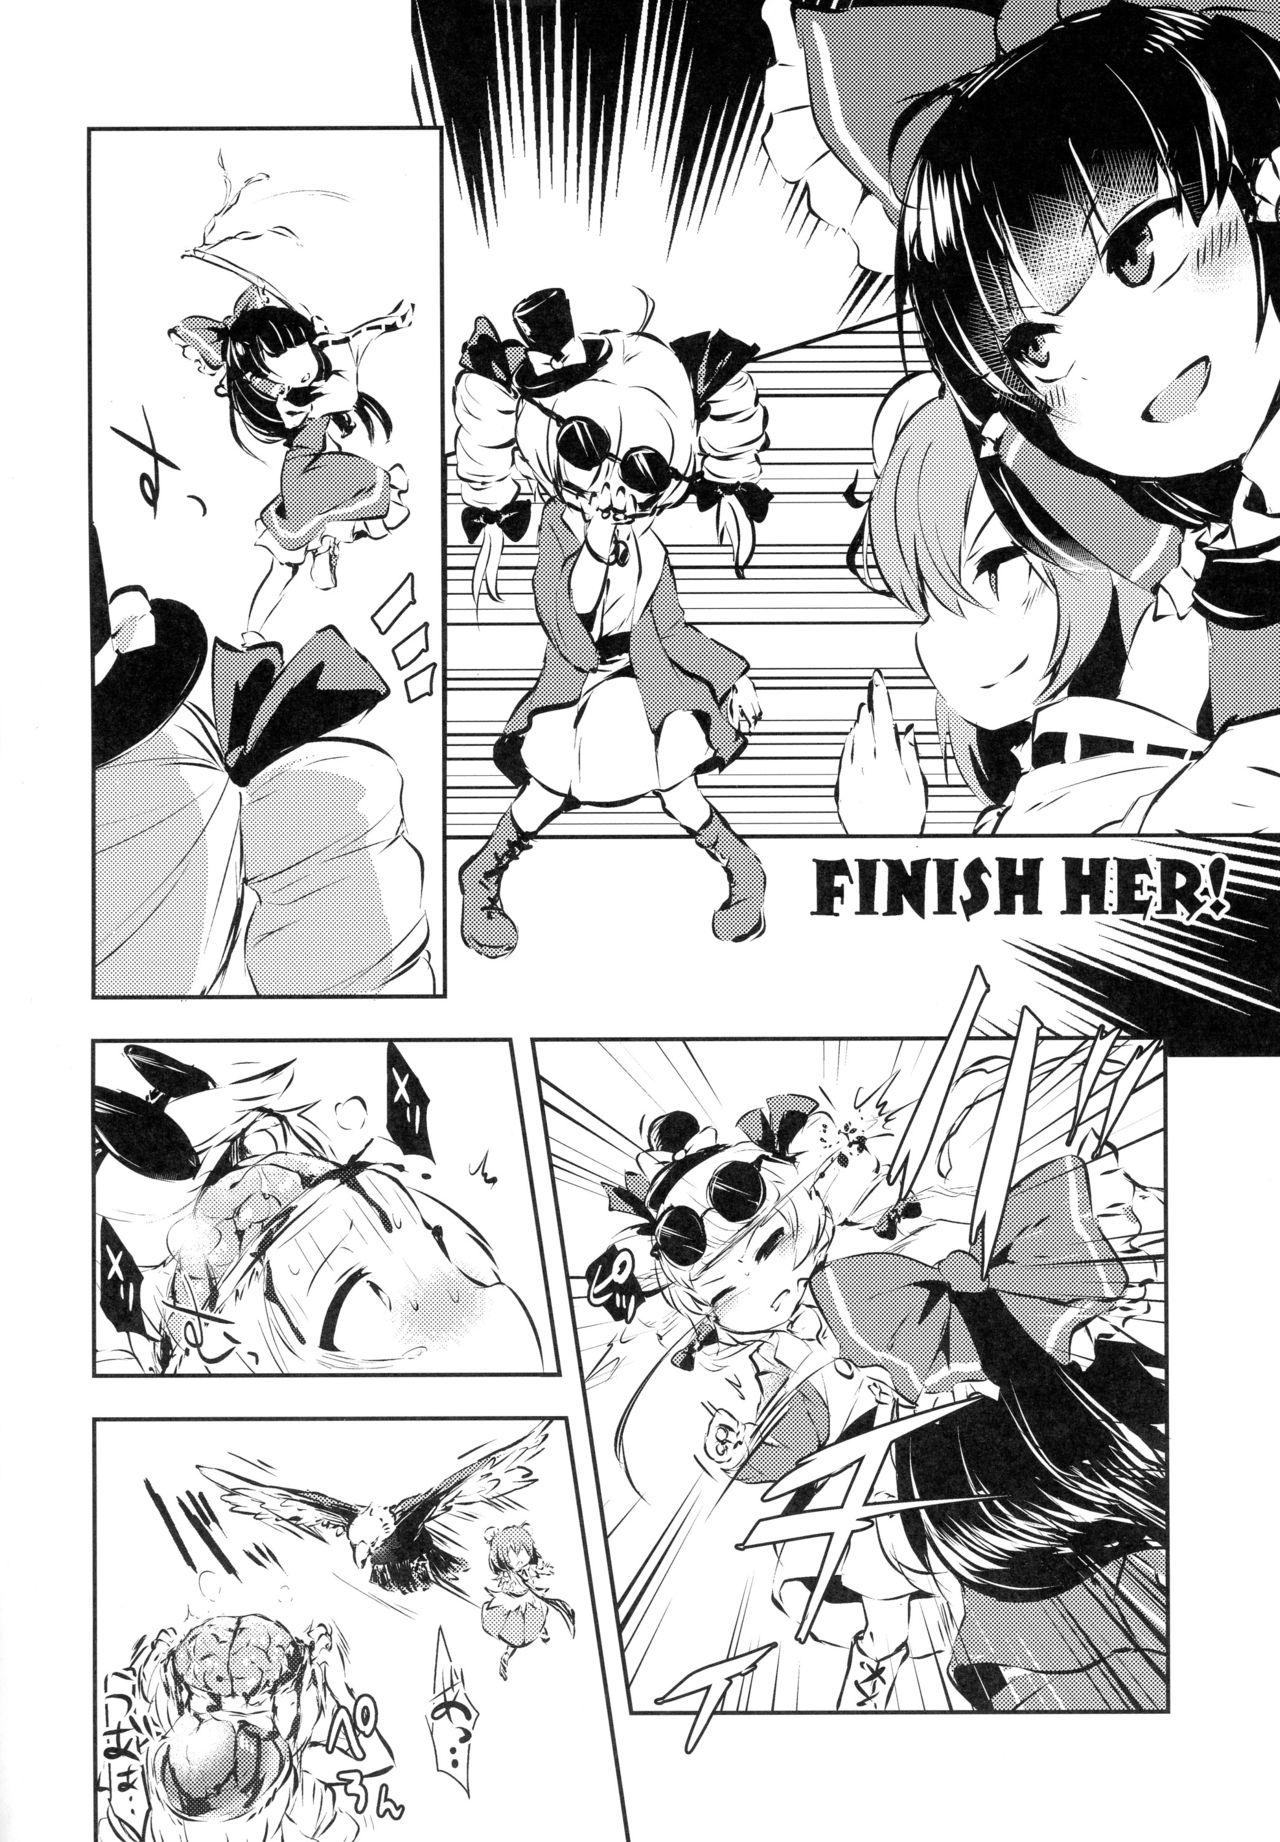 Sucking AURA POSSESSION'S FATALITIES - Touhou project All Natural - Page 4